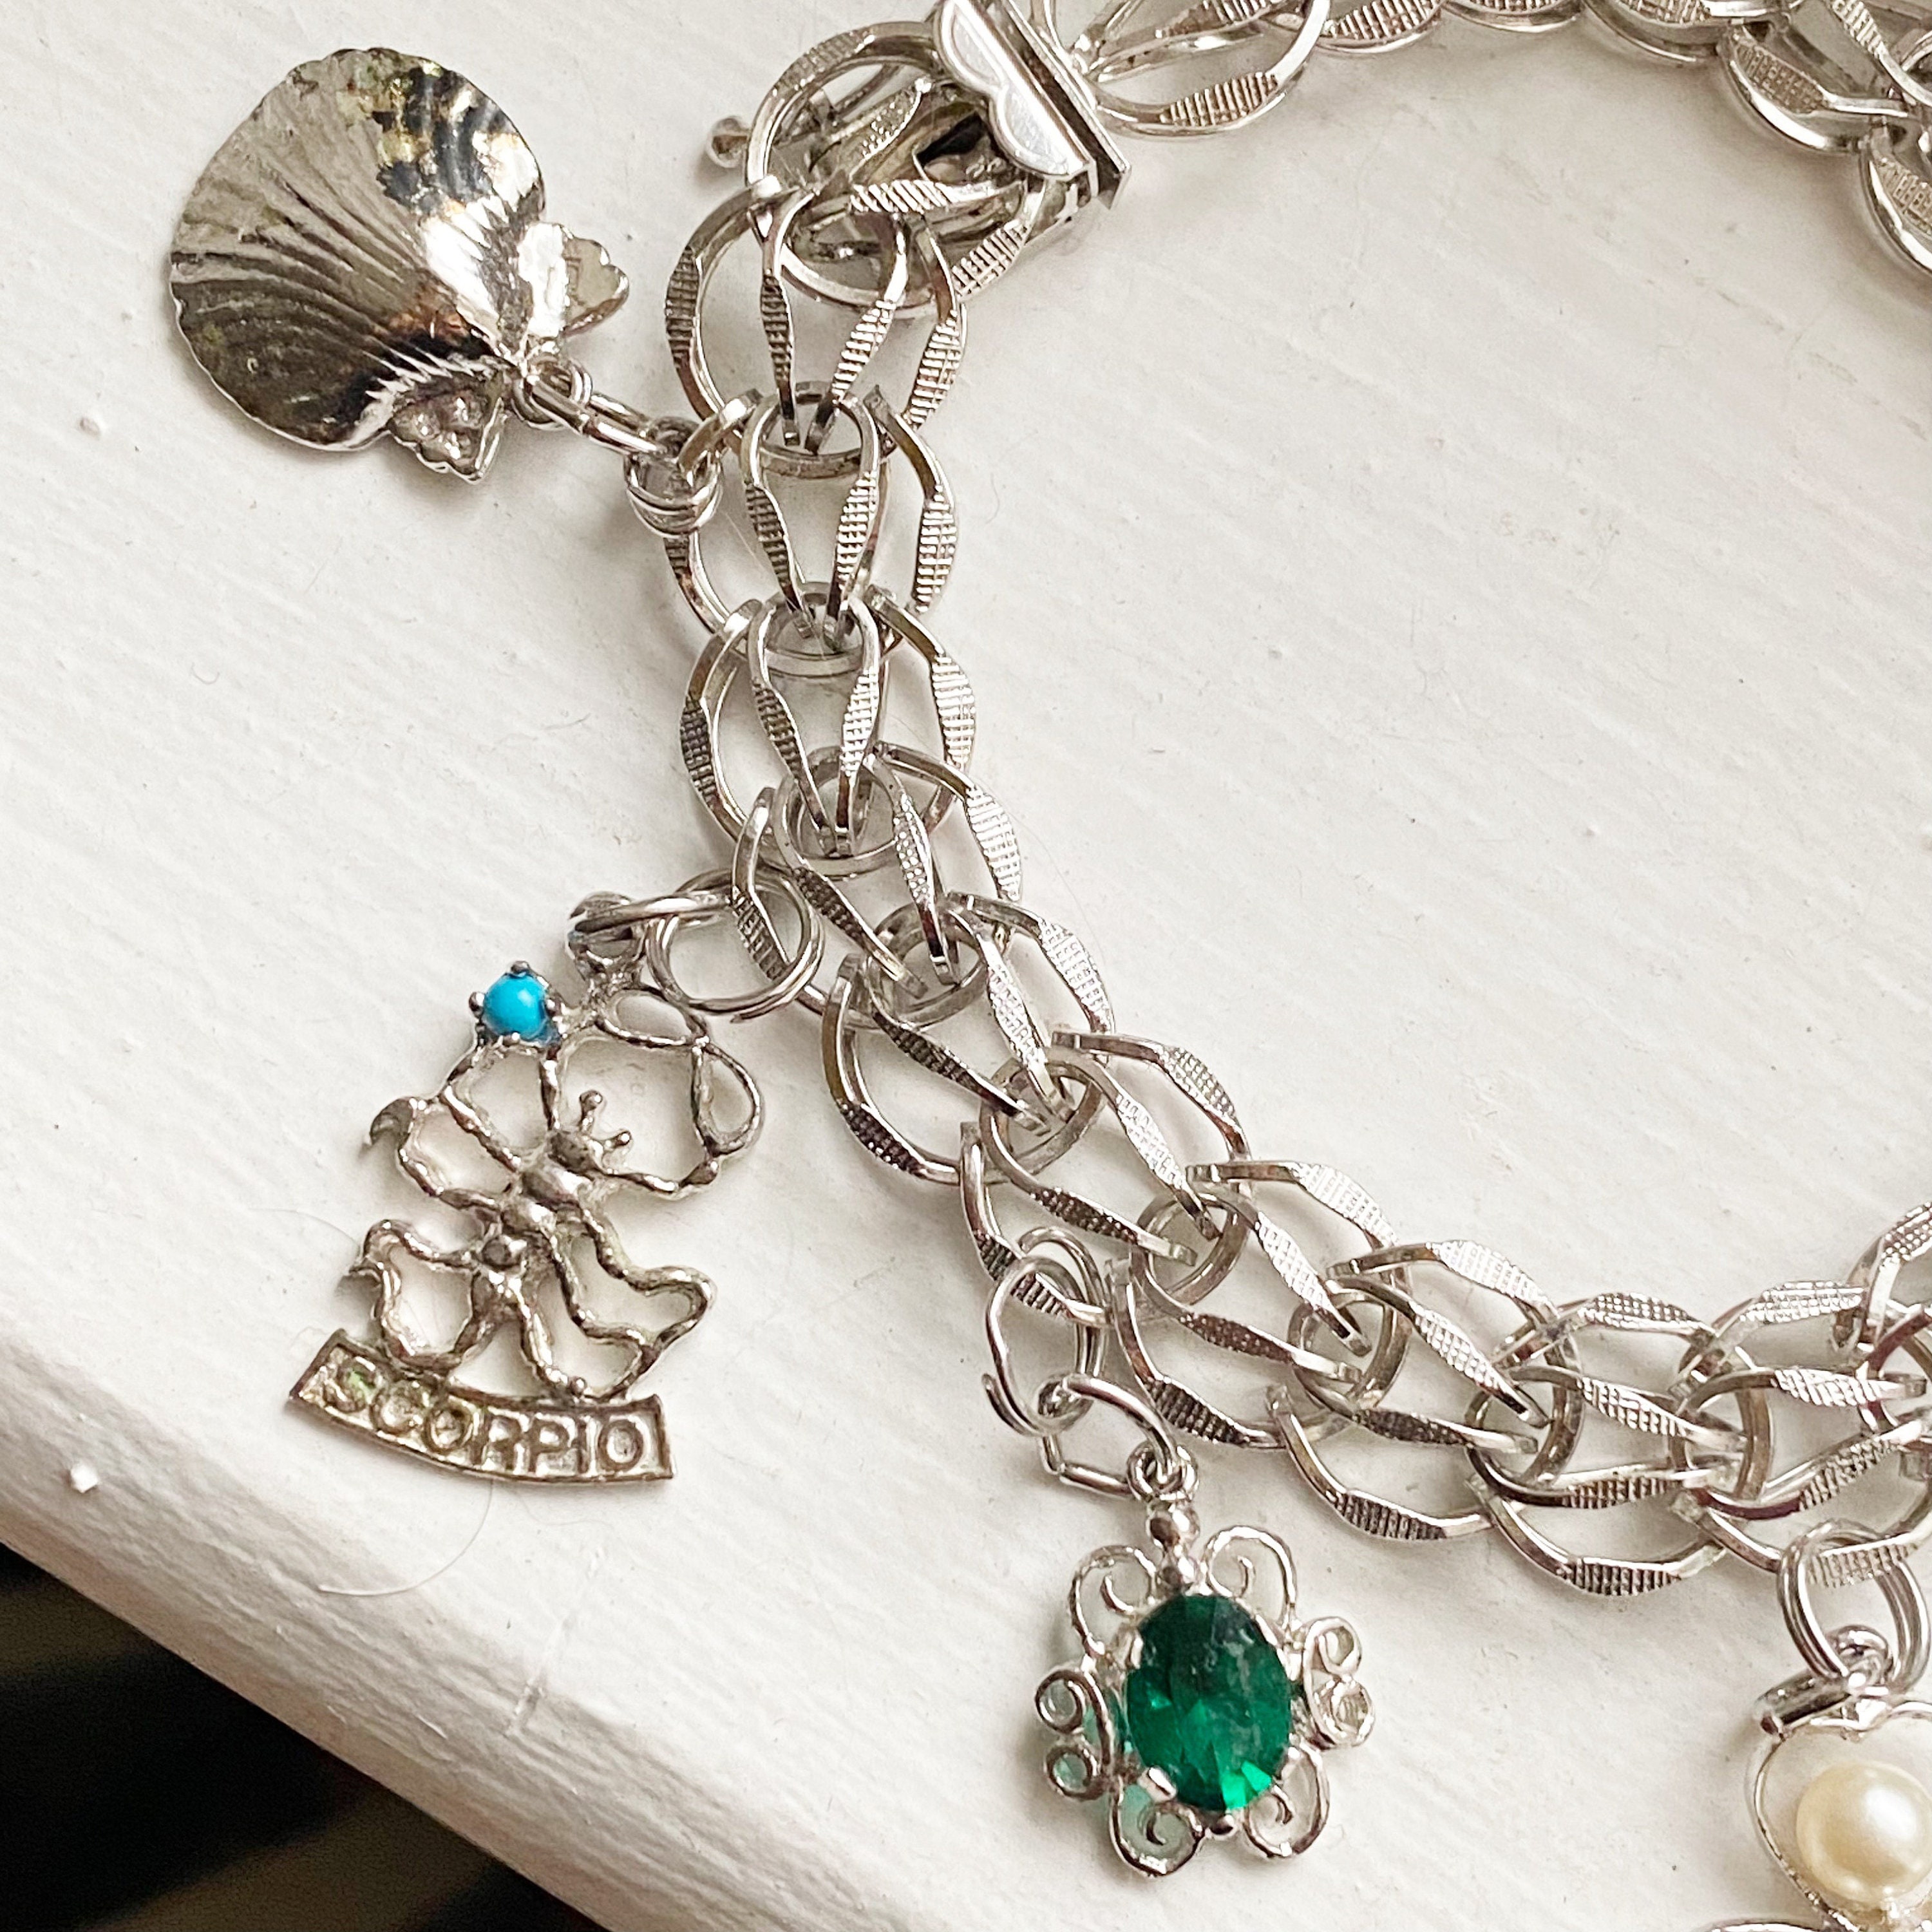 Sterling Charm Bracelet with Assorted Charming Charms.